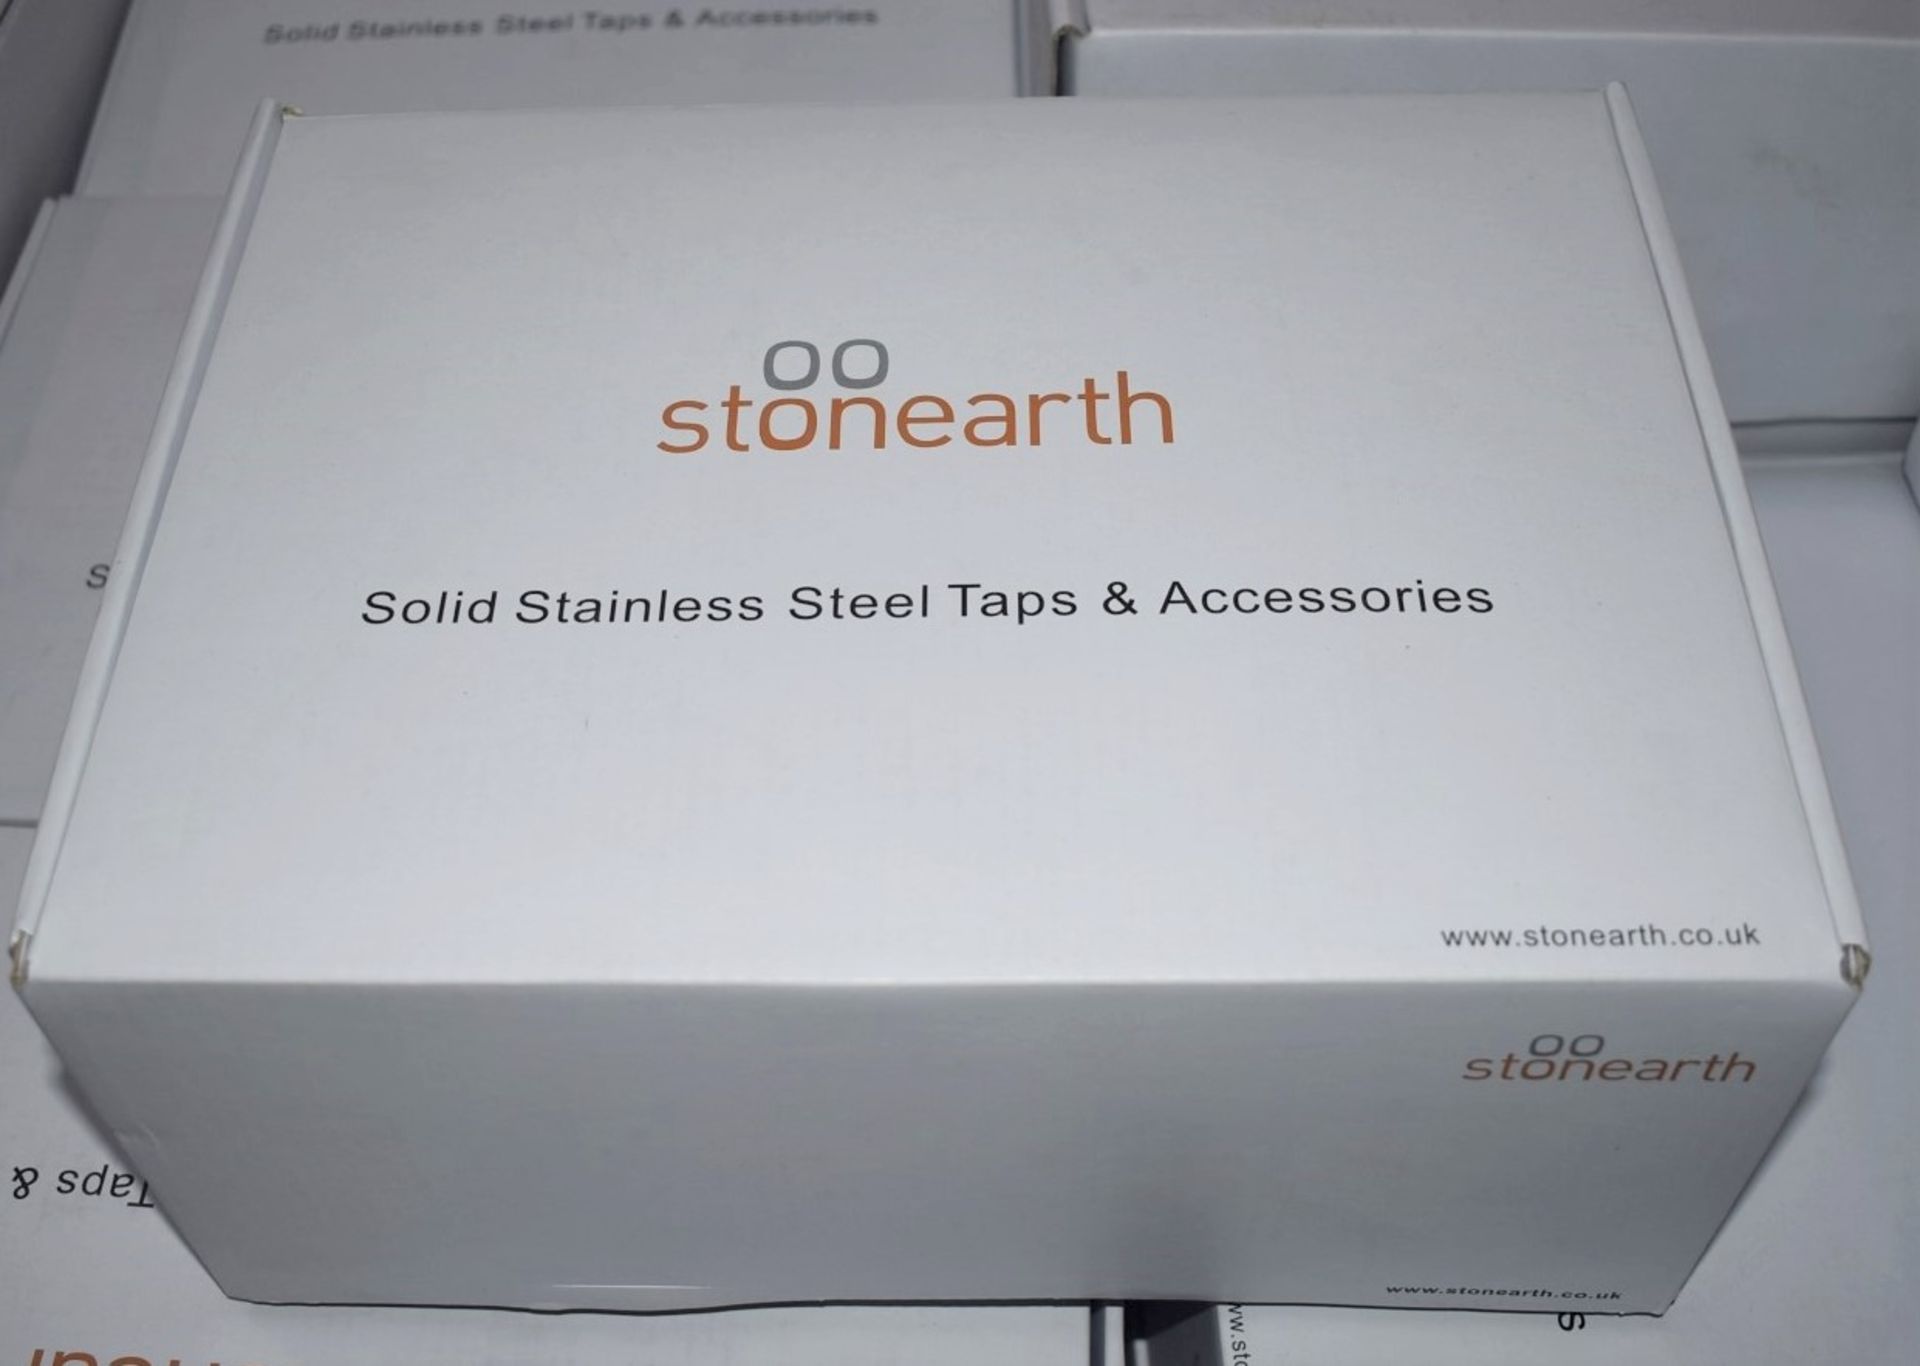 1 x Stonearth 'Metro' Stainless Steel Wall Mounted Tap - Brand New & Boxed - RRP £345 - Ref: TP823 - Image 8 of 9